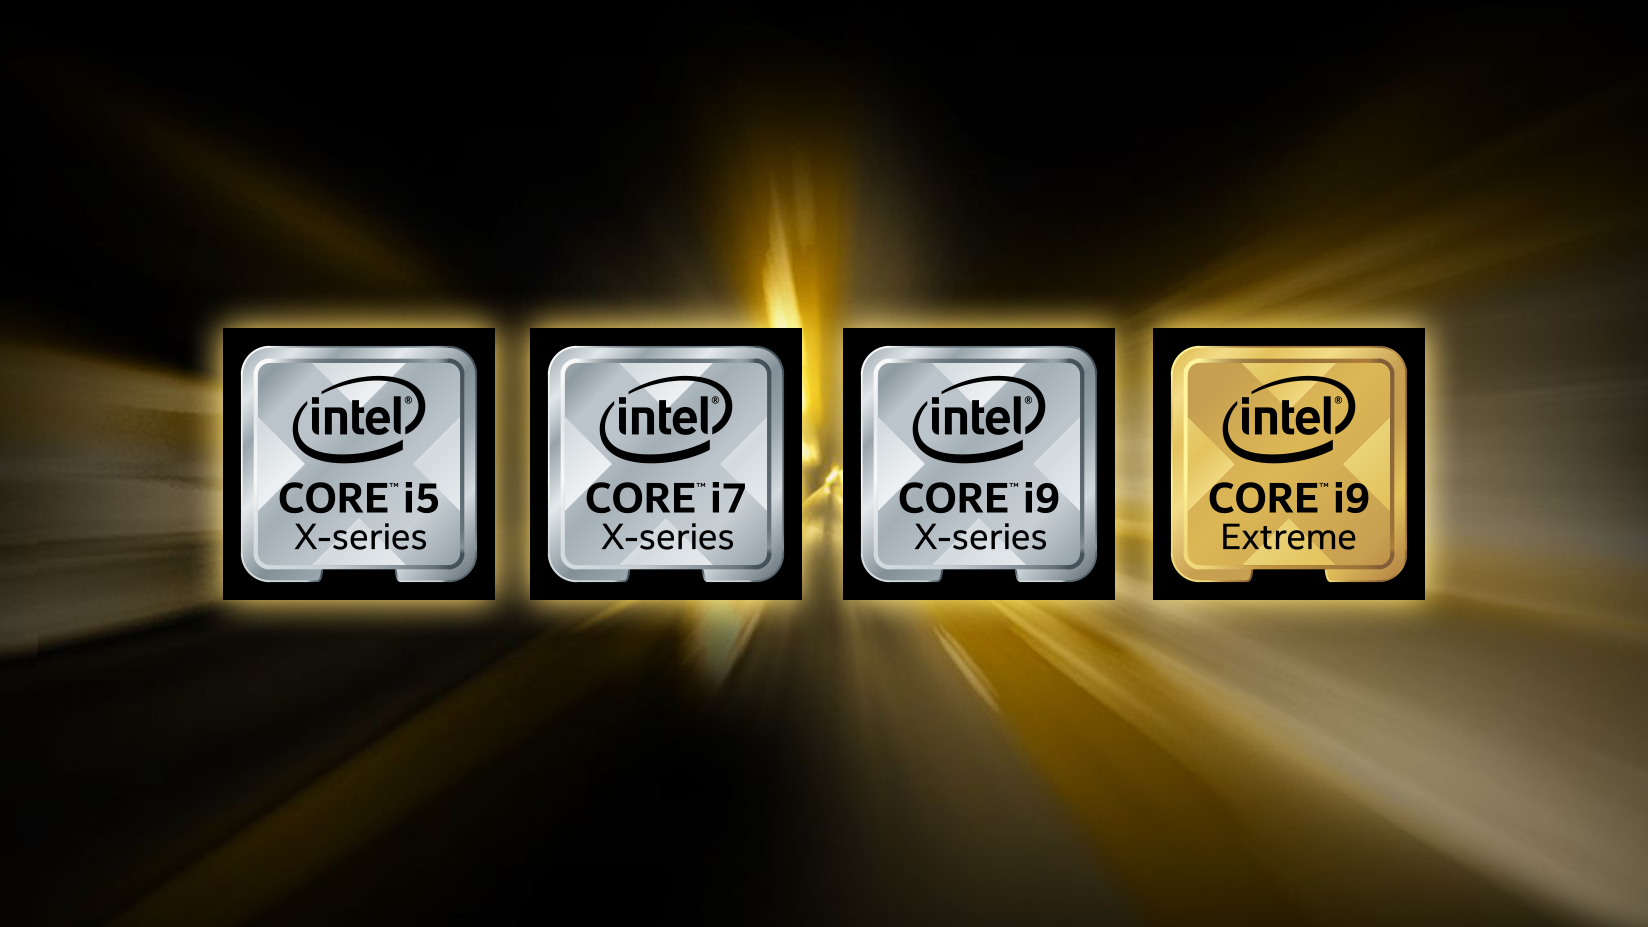 Intel is preparing to introduce the i9 processors for laptops